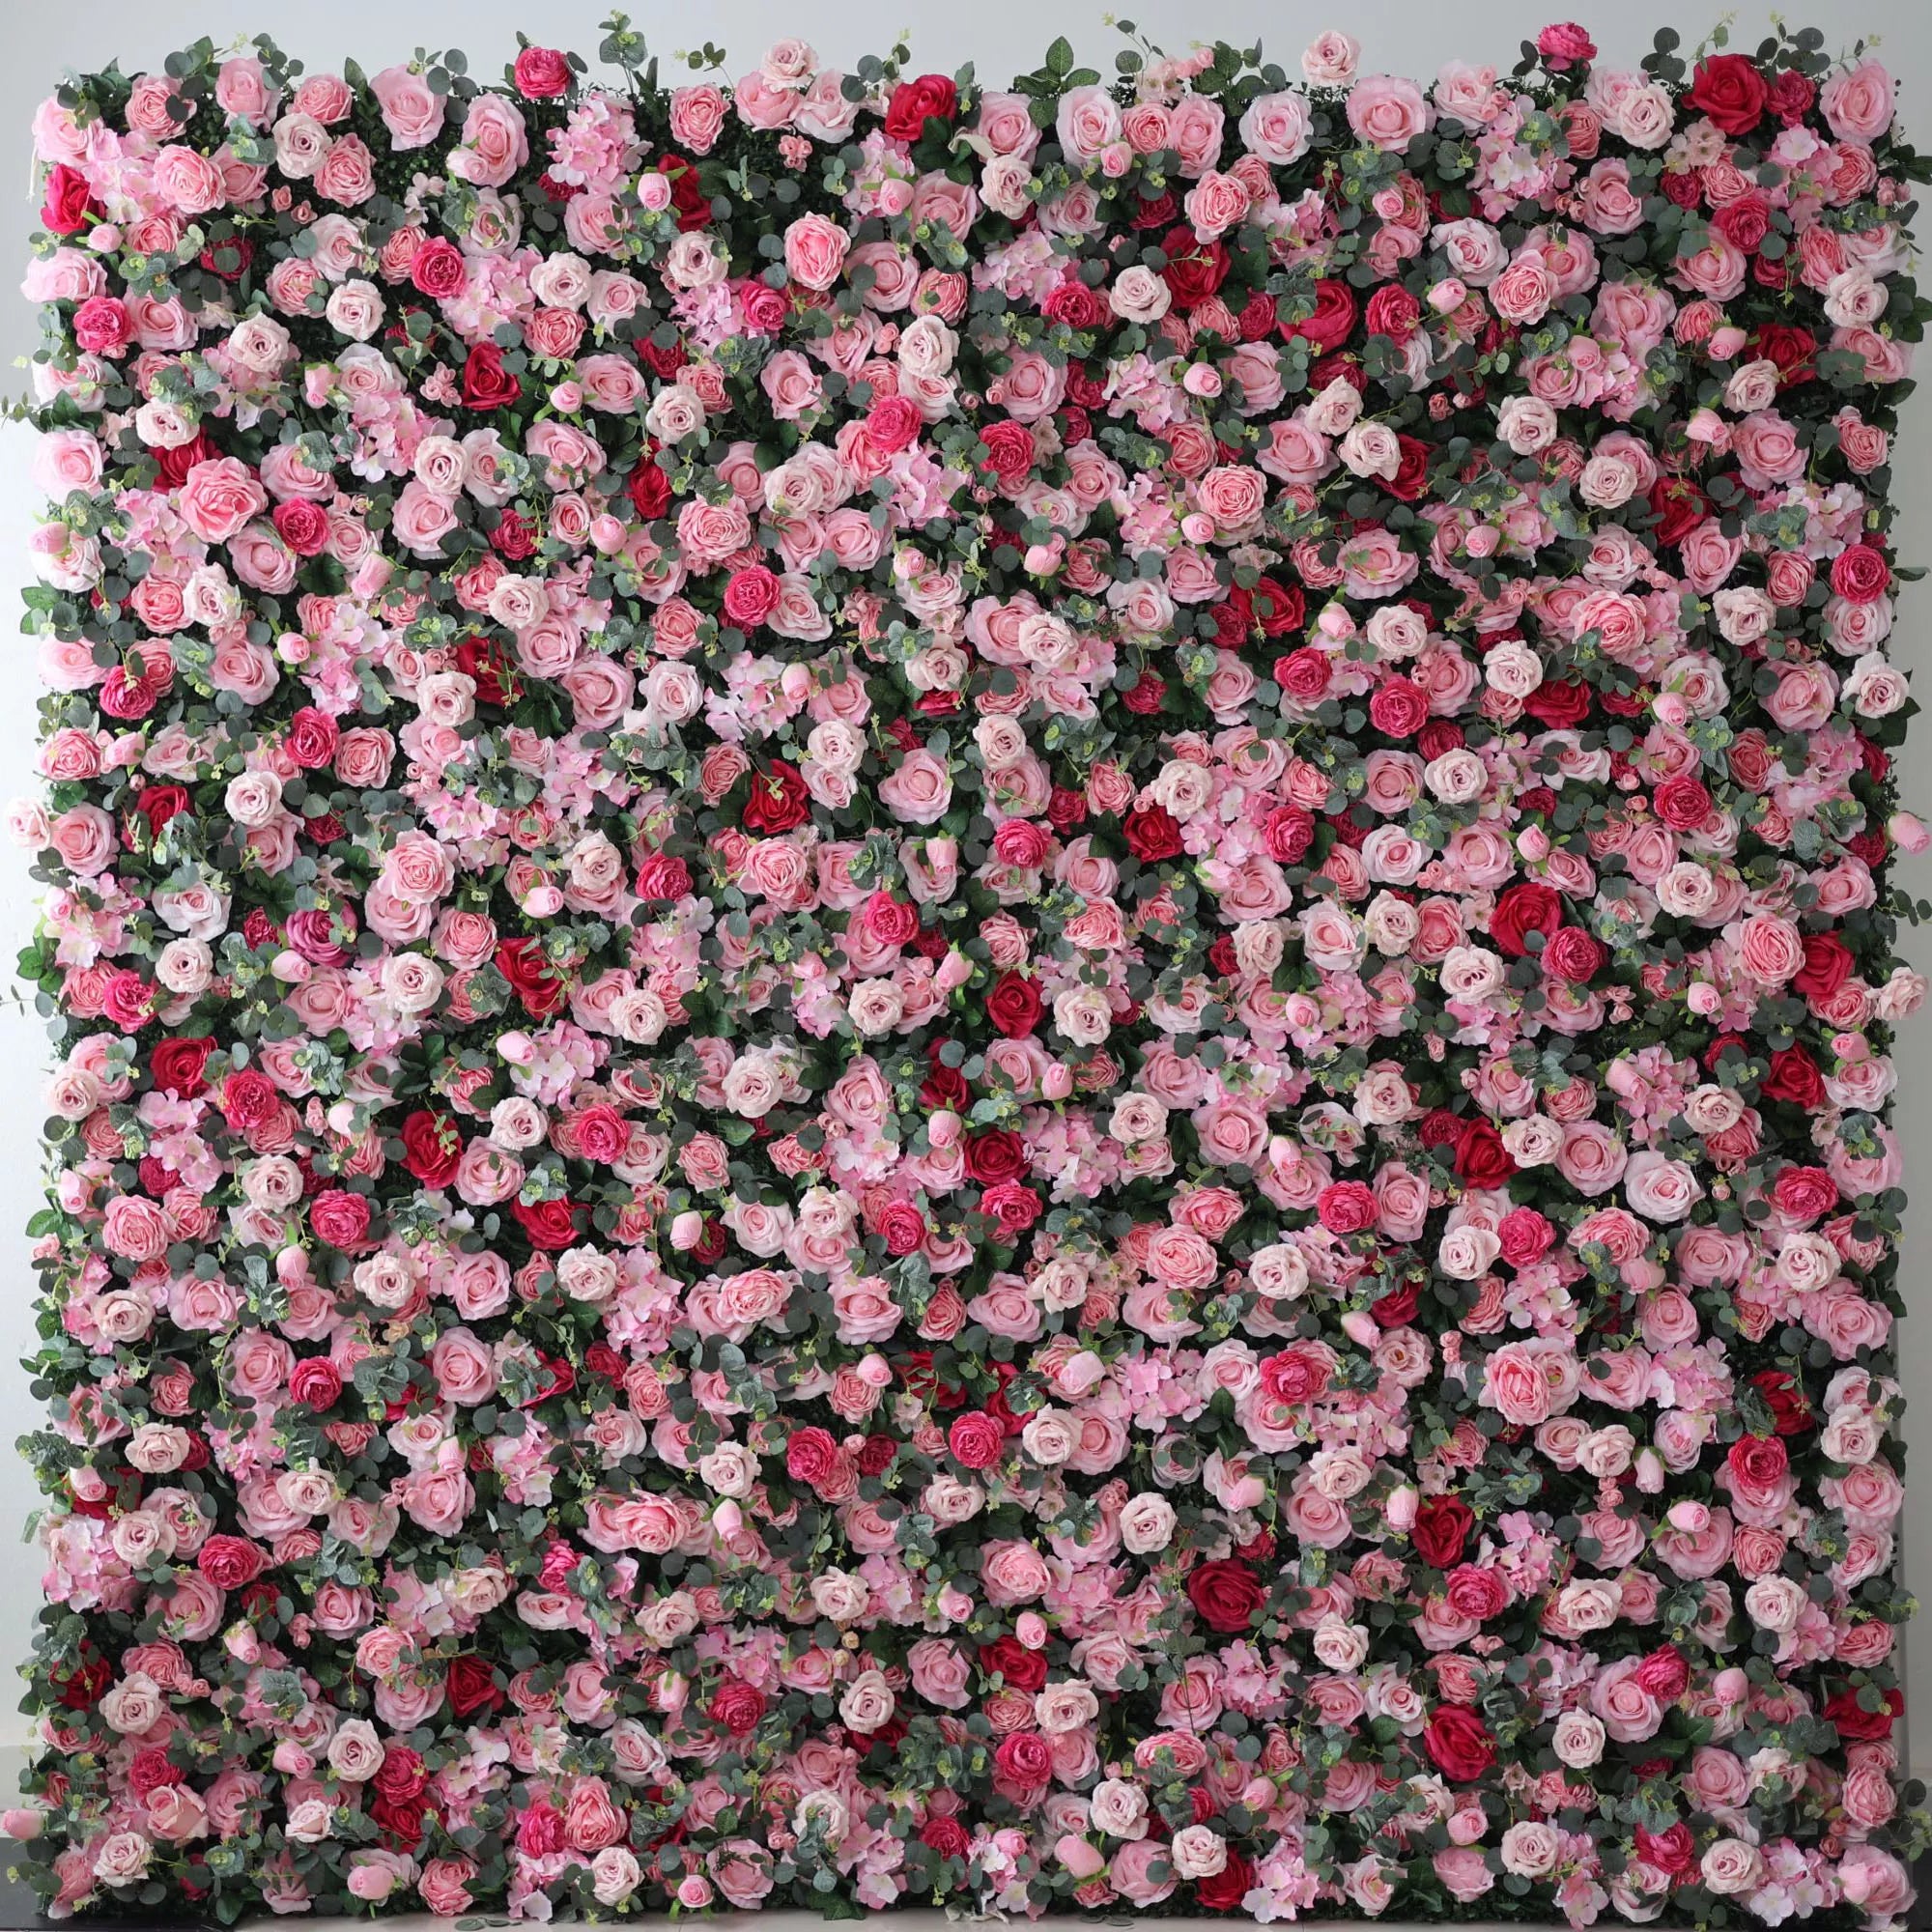 Valar Flowers' Artificial Fabric Flower Wall: Blooming Bliss. A stunning medley of pink, red, and white roses, beautifully set, creating an atmosphere of romance and botanical grandeur.